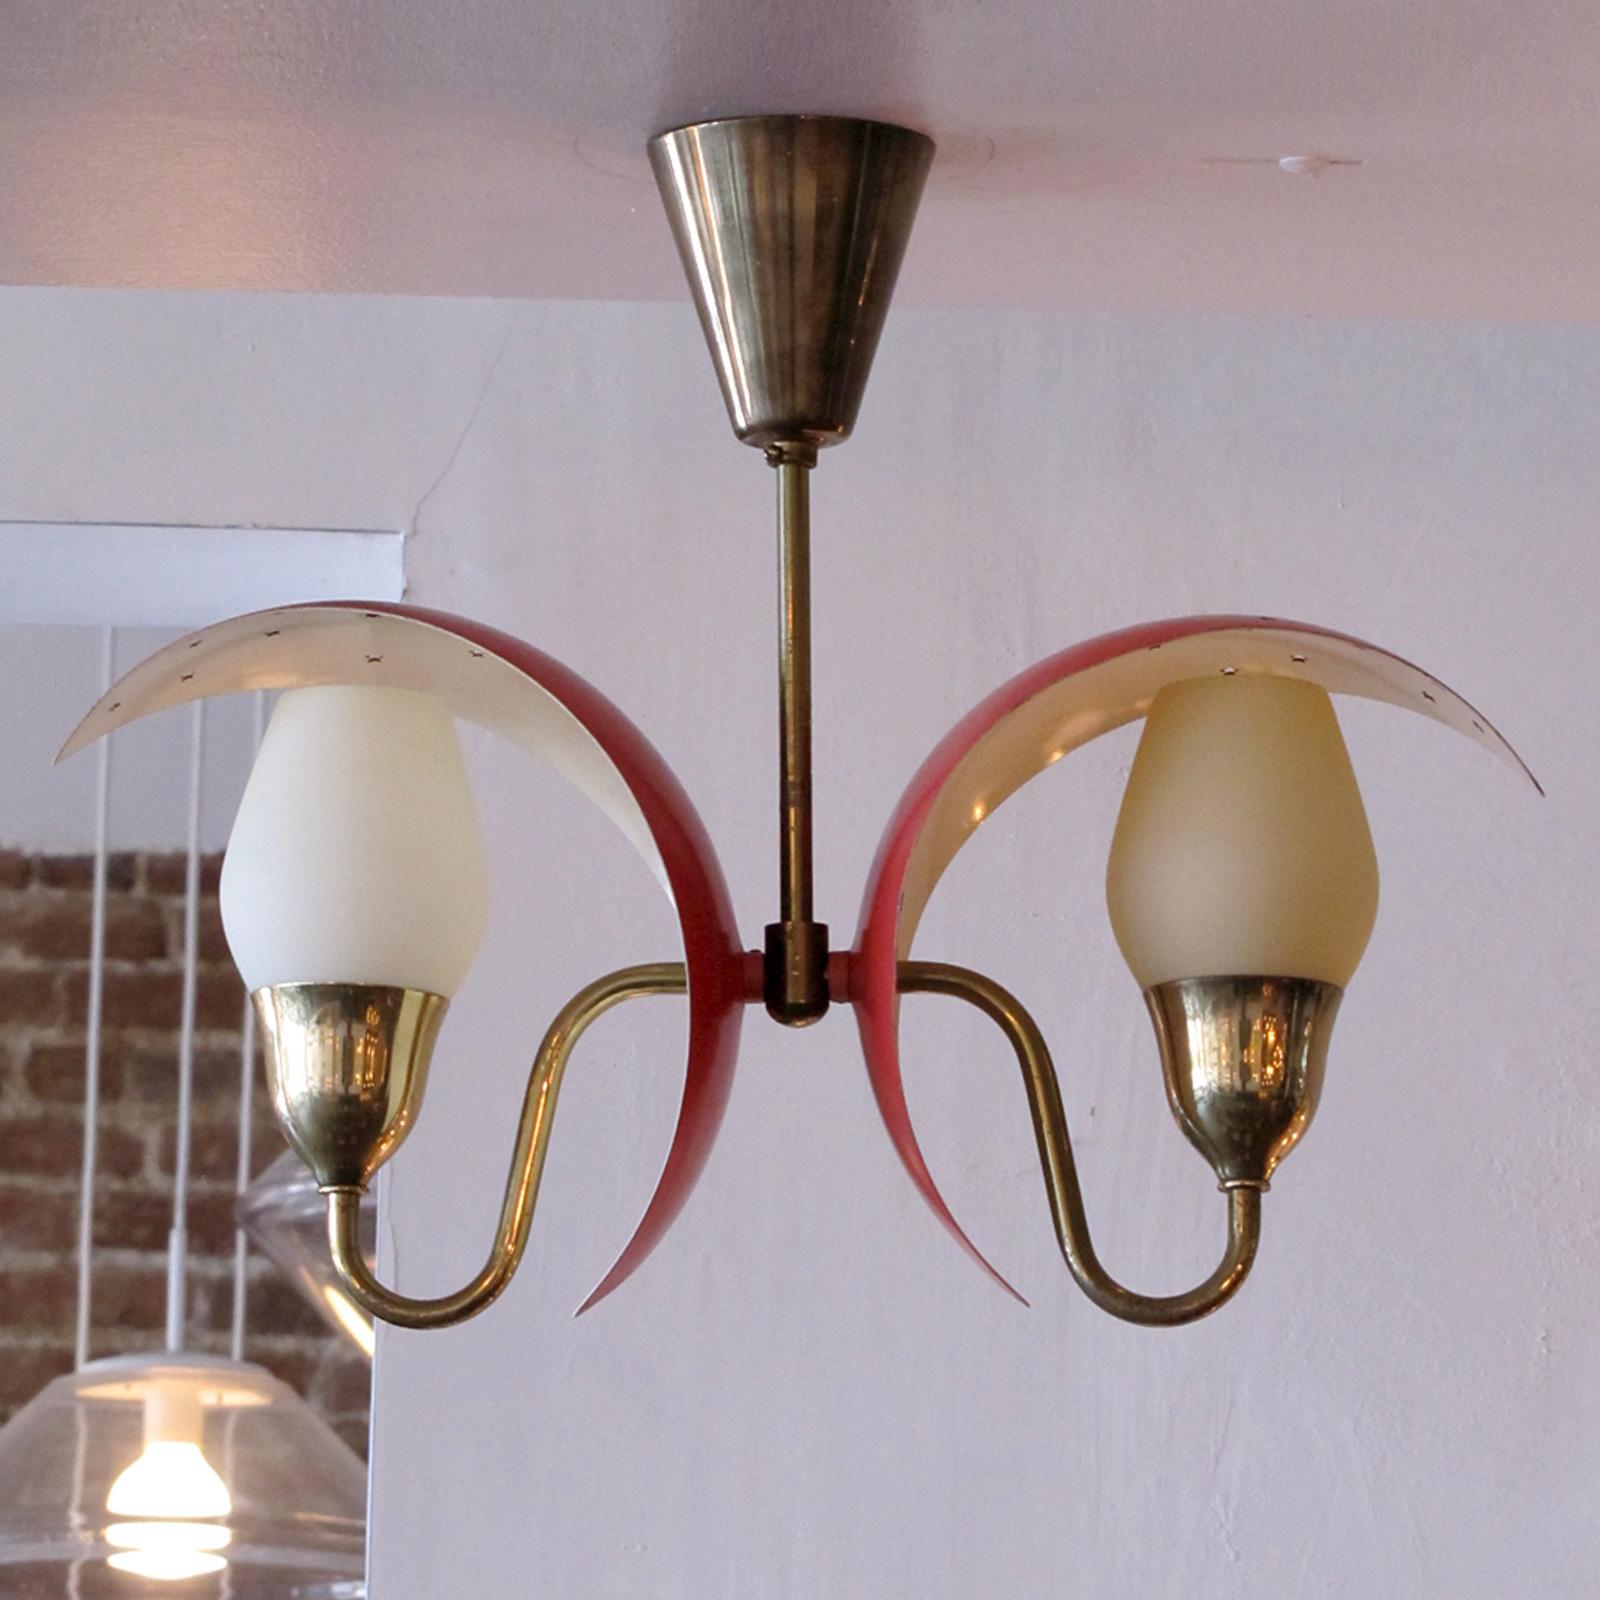 Wonderful Danish double arm brass chandelier by Bent Karlby for Fog & Mørup, with frosted tulip shades under red 